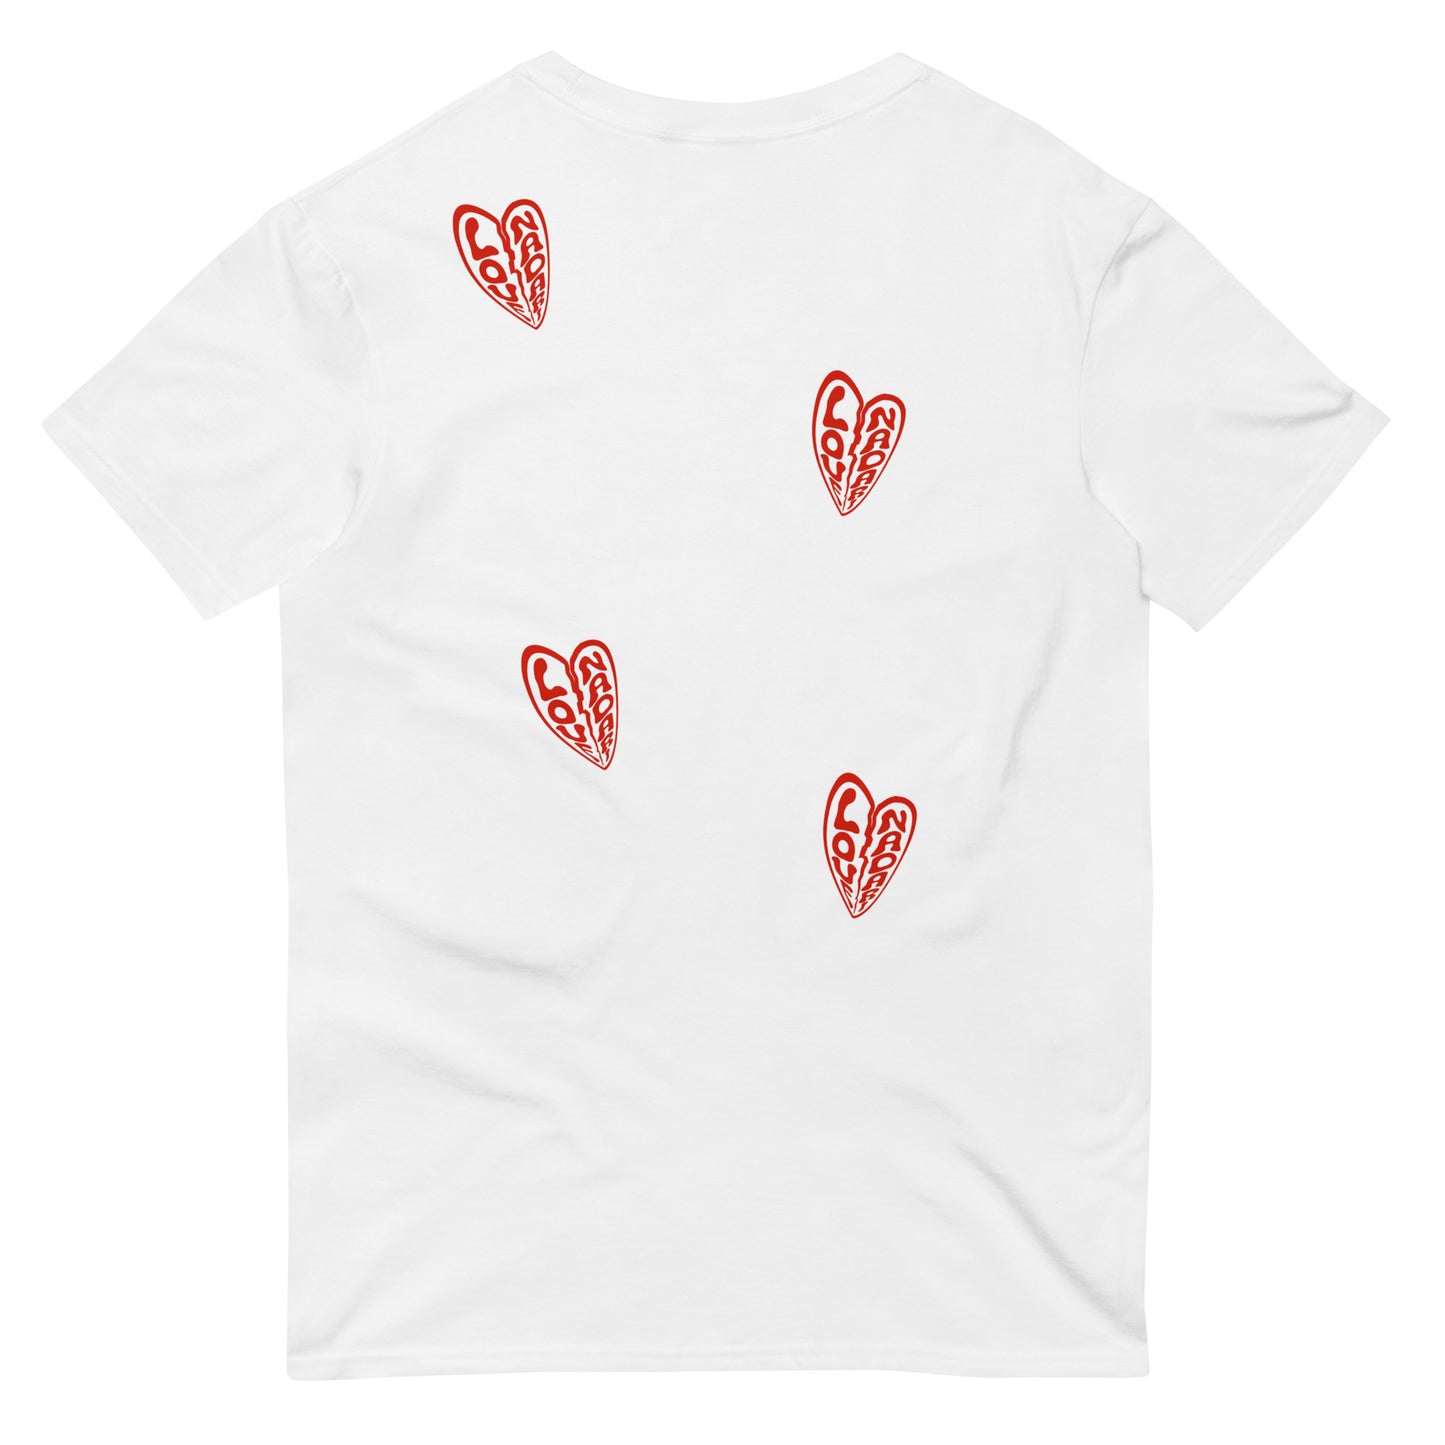 Nadari Legacy warped love t-shirt white and candy red.